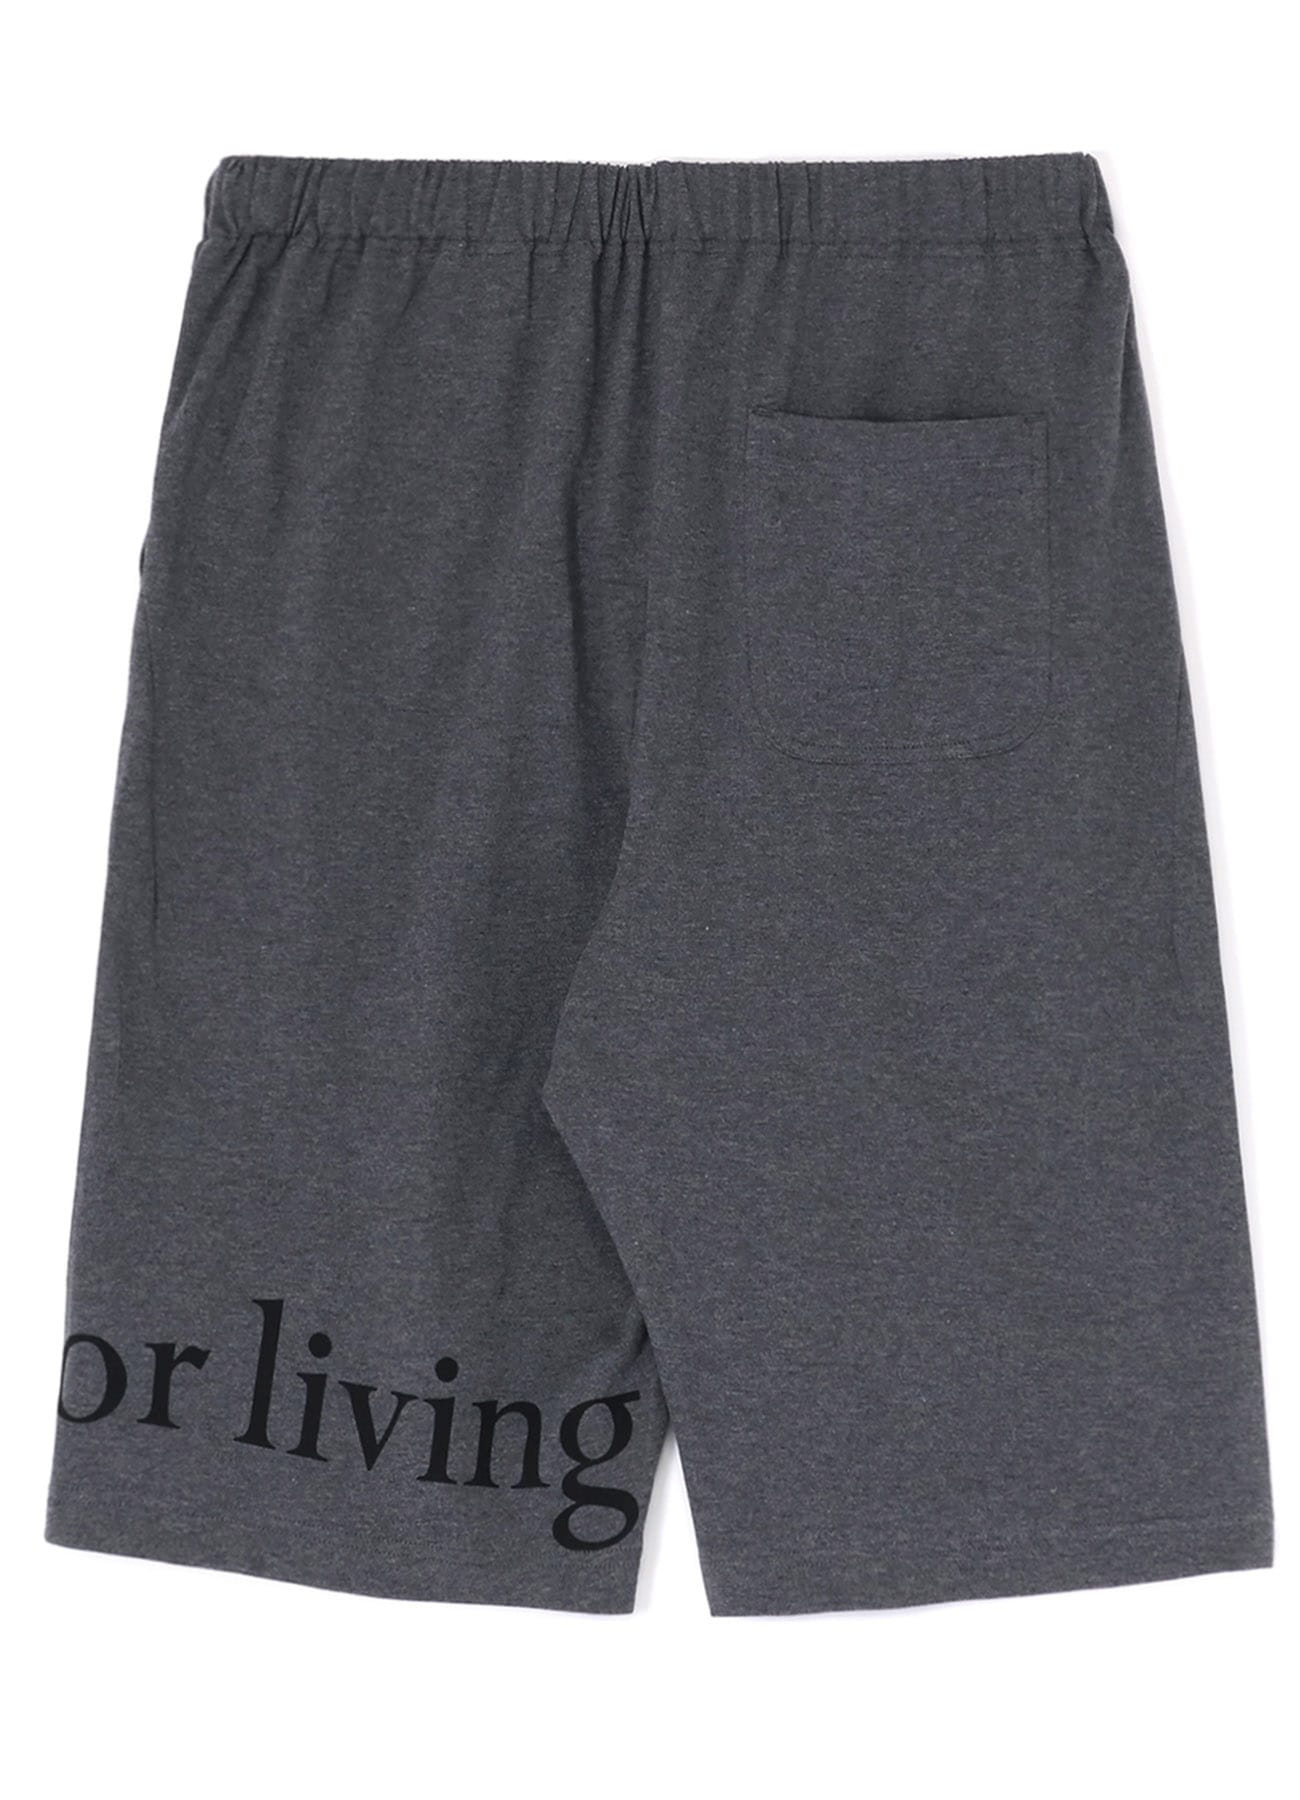 40/2 COTTON JERSEY KNEE-LENGTH PANTS(FREE SIZE Dark Gray): Y's for